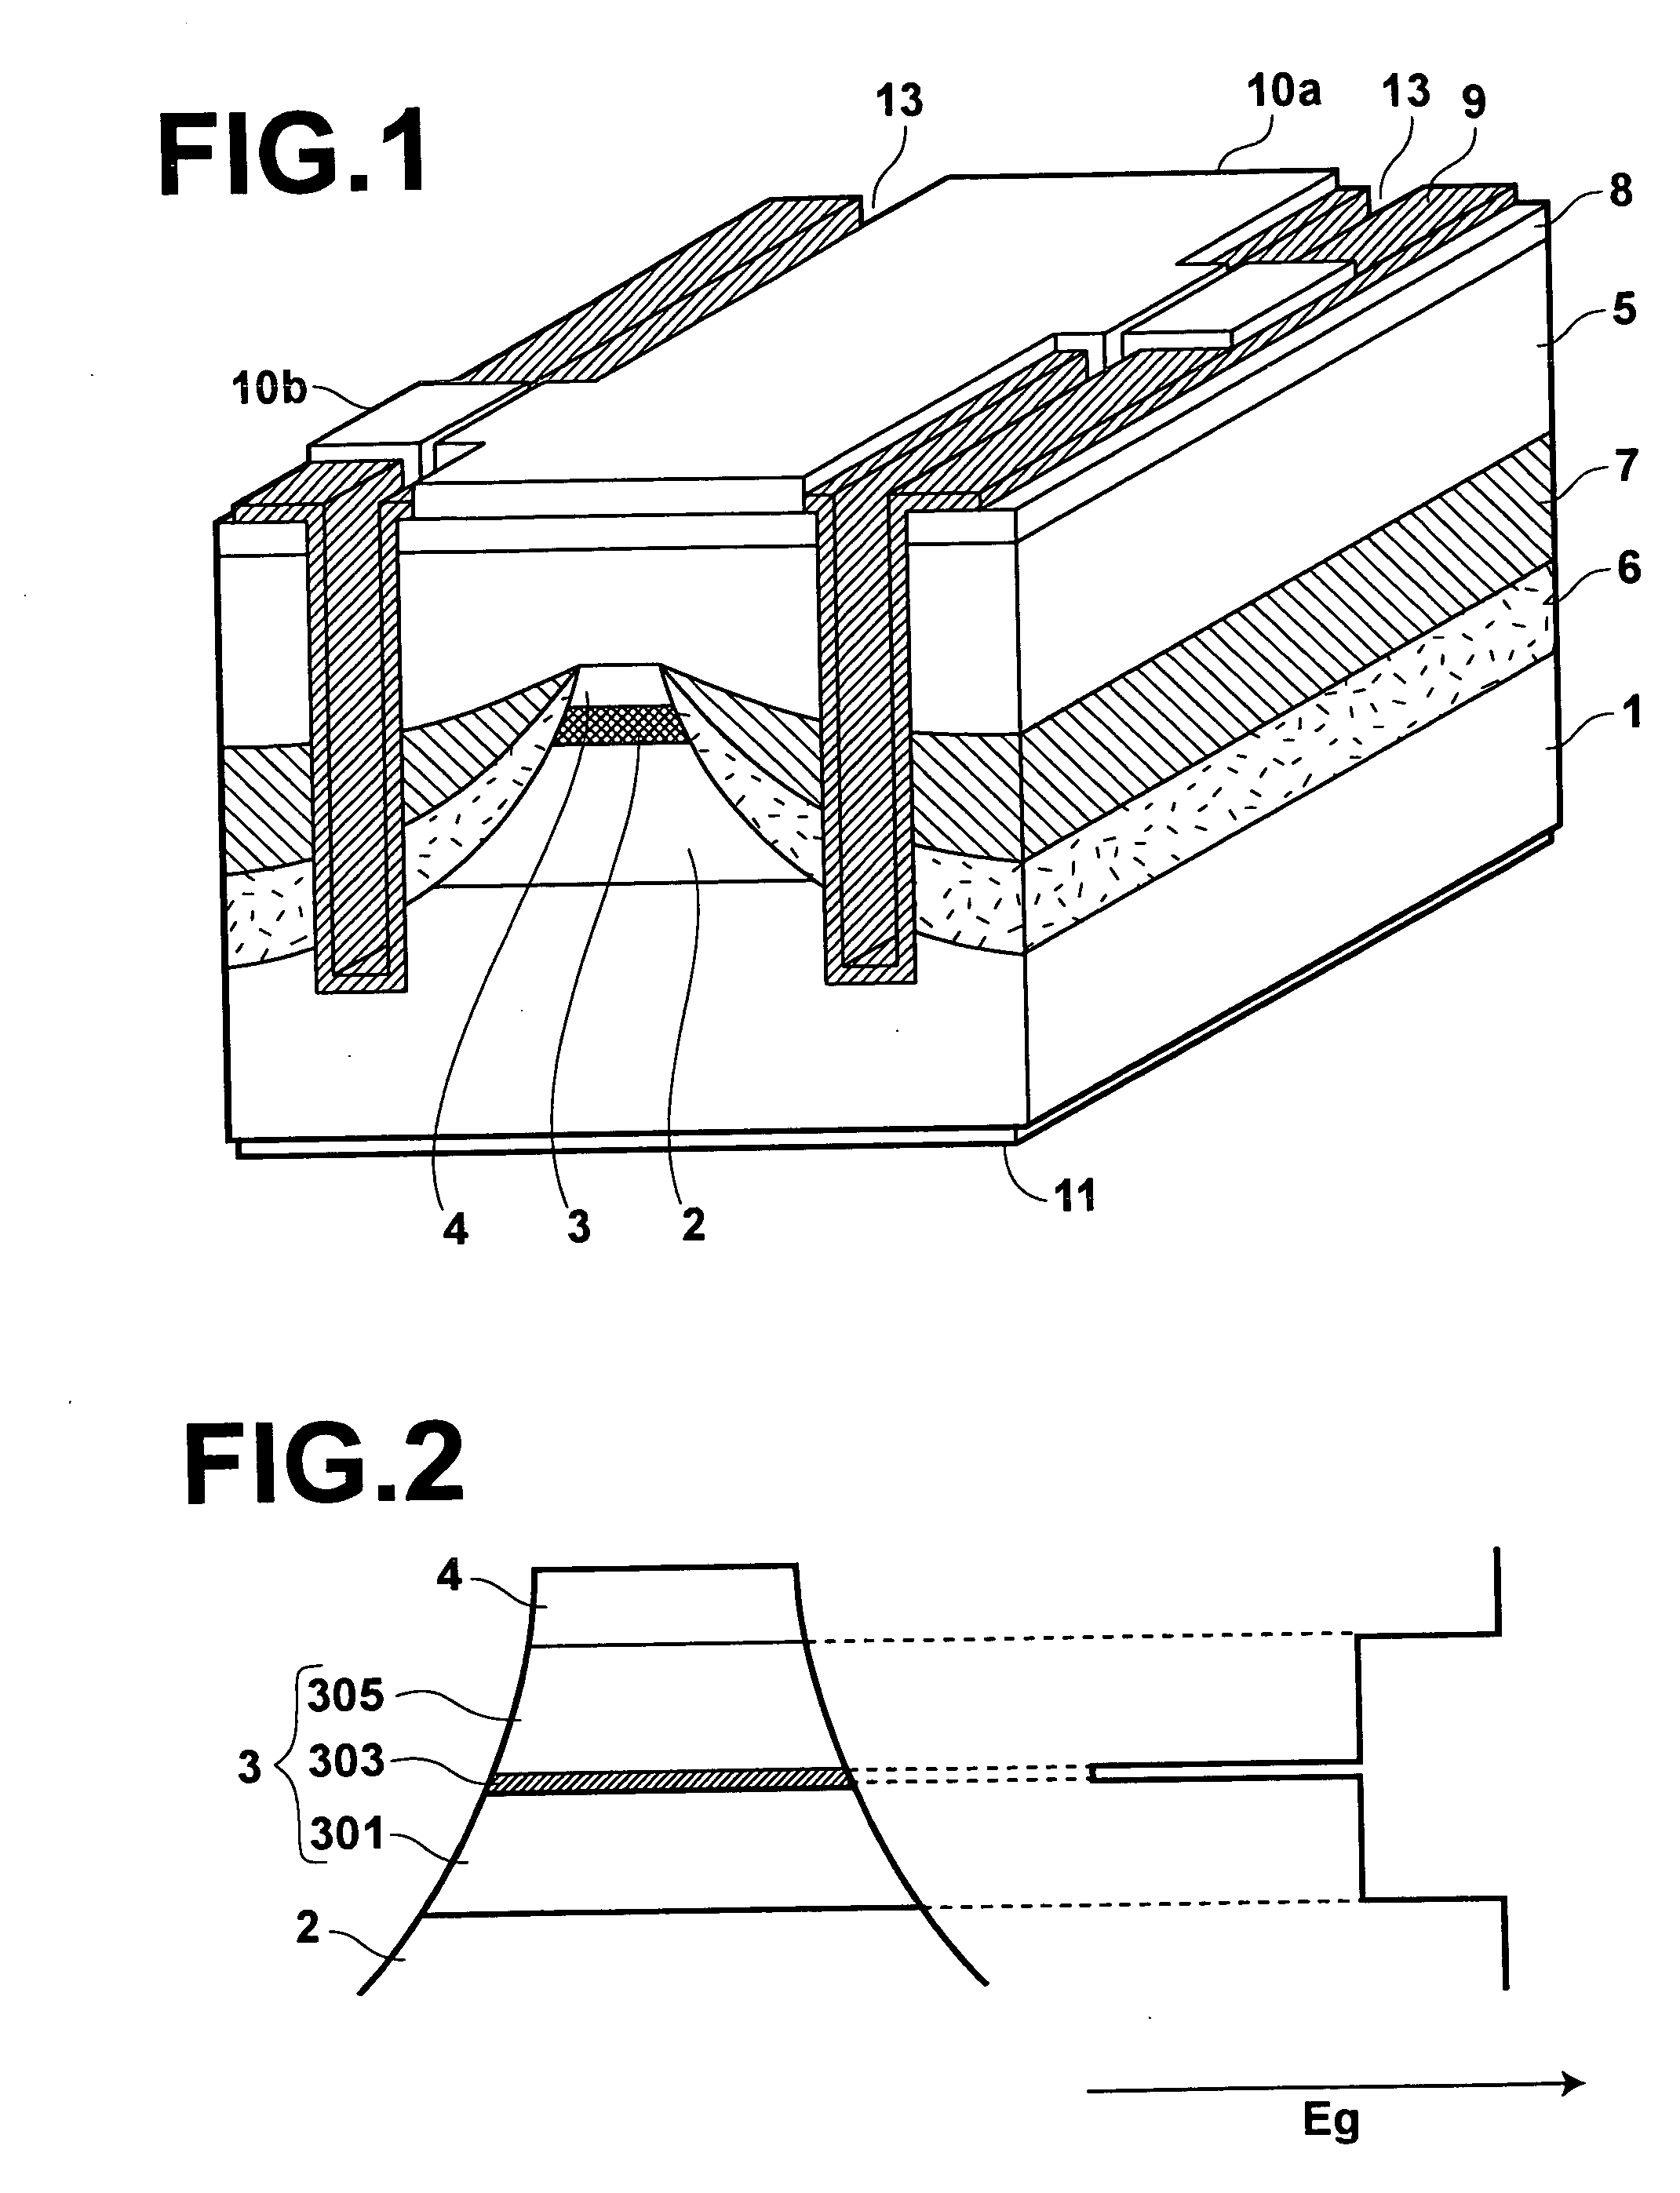 Semiconductor laser element having InGaAs compressive-strained quantum-well active layer